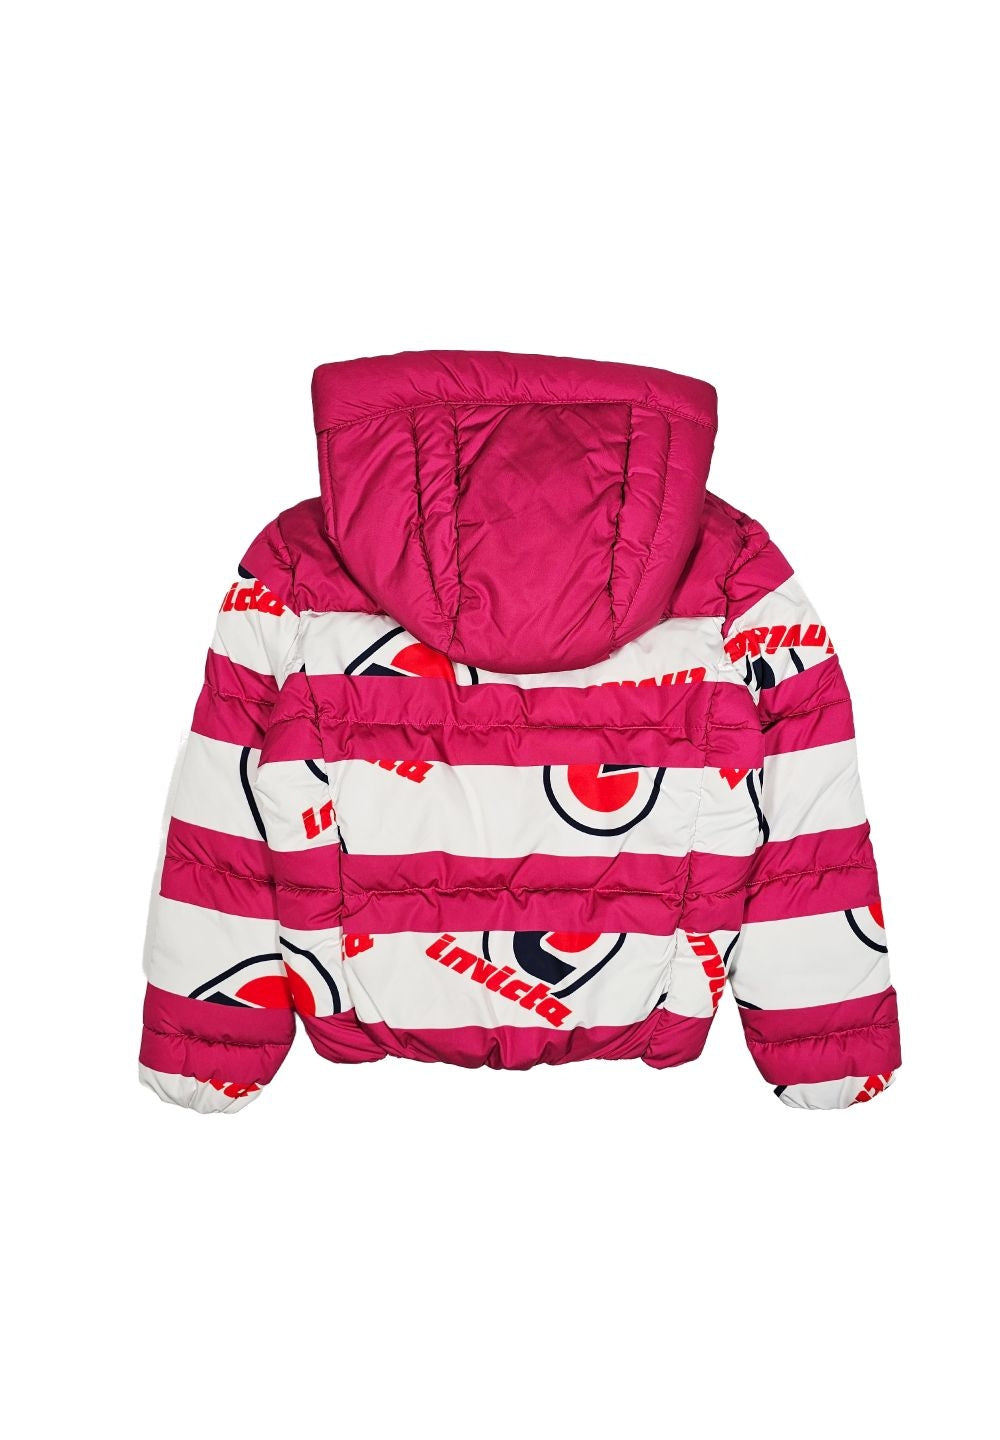 Pink-white jacket for girls